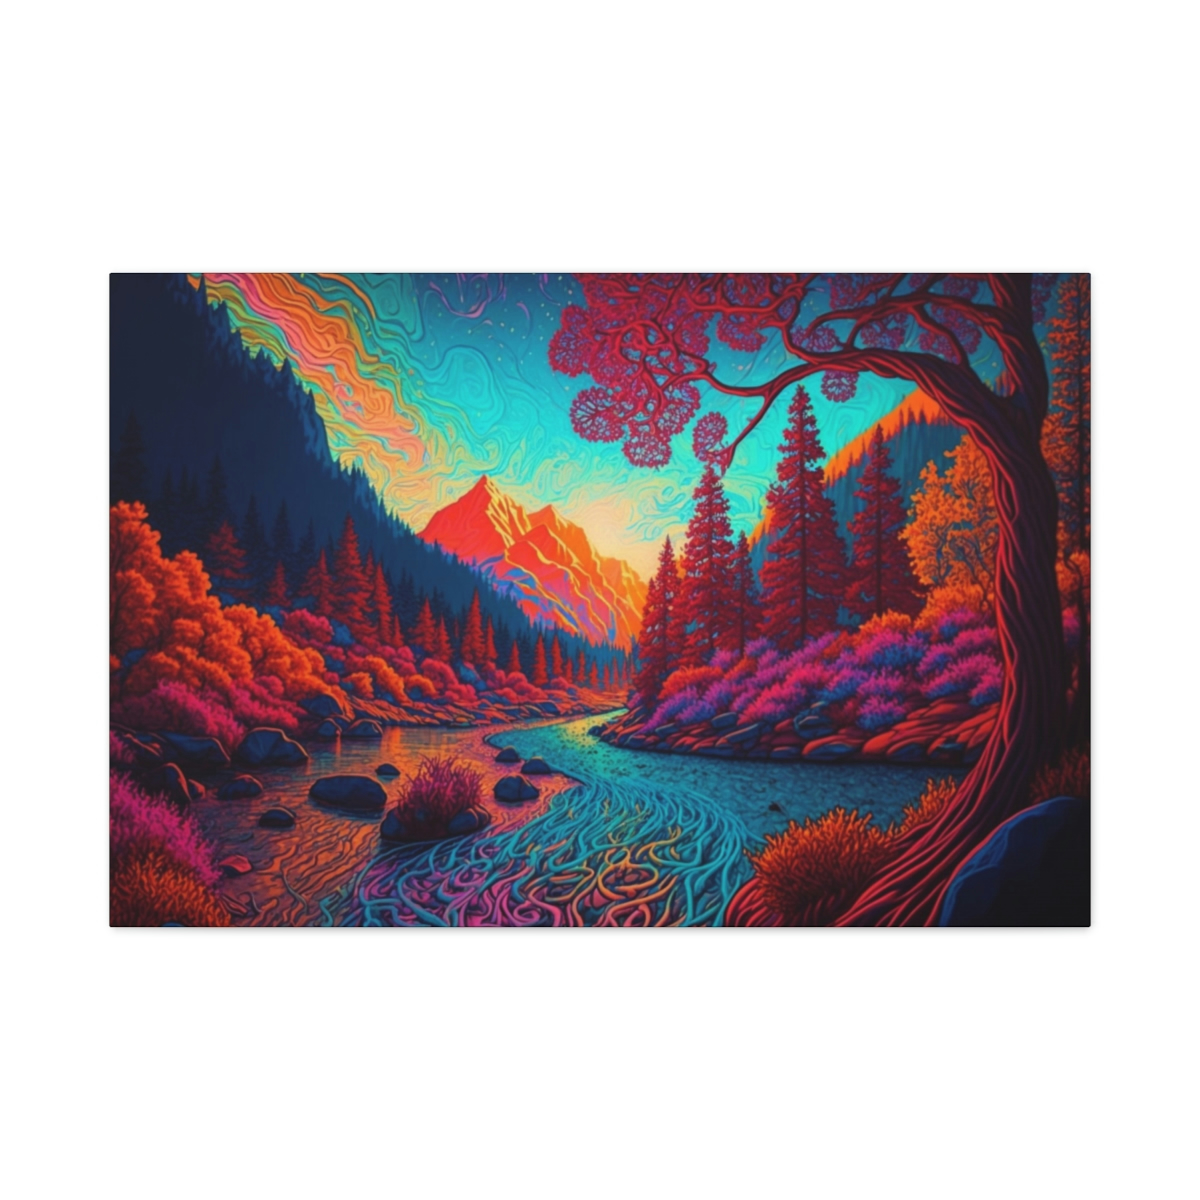 Trippy Art Canvas Print: Go With The Flow